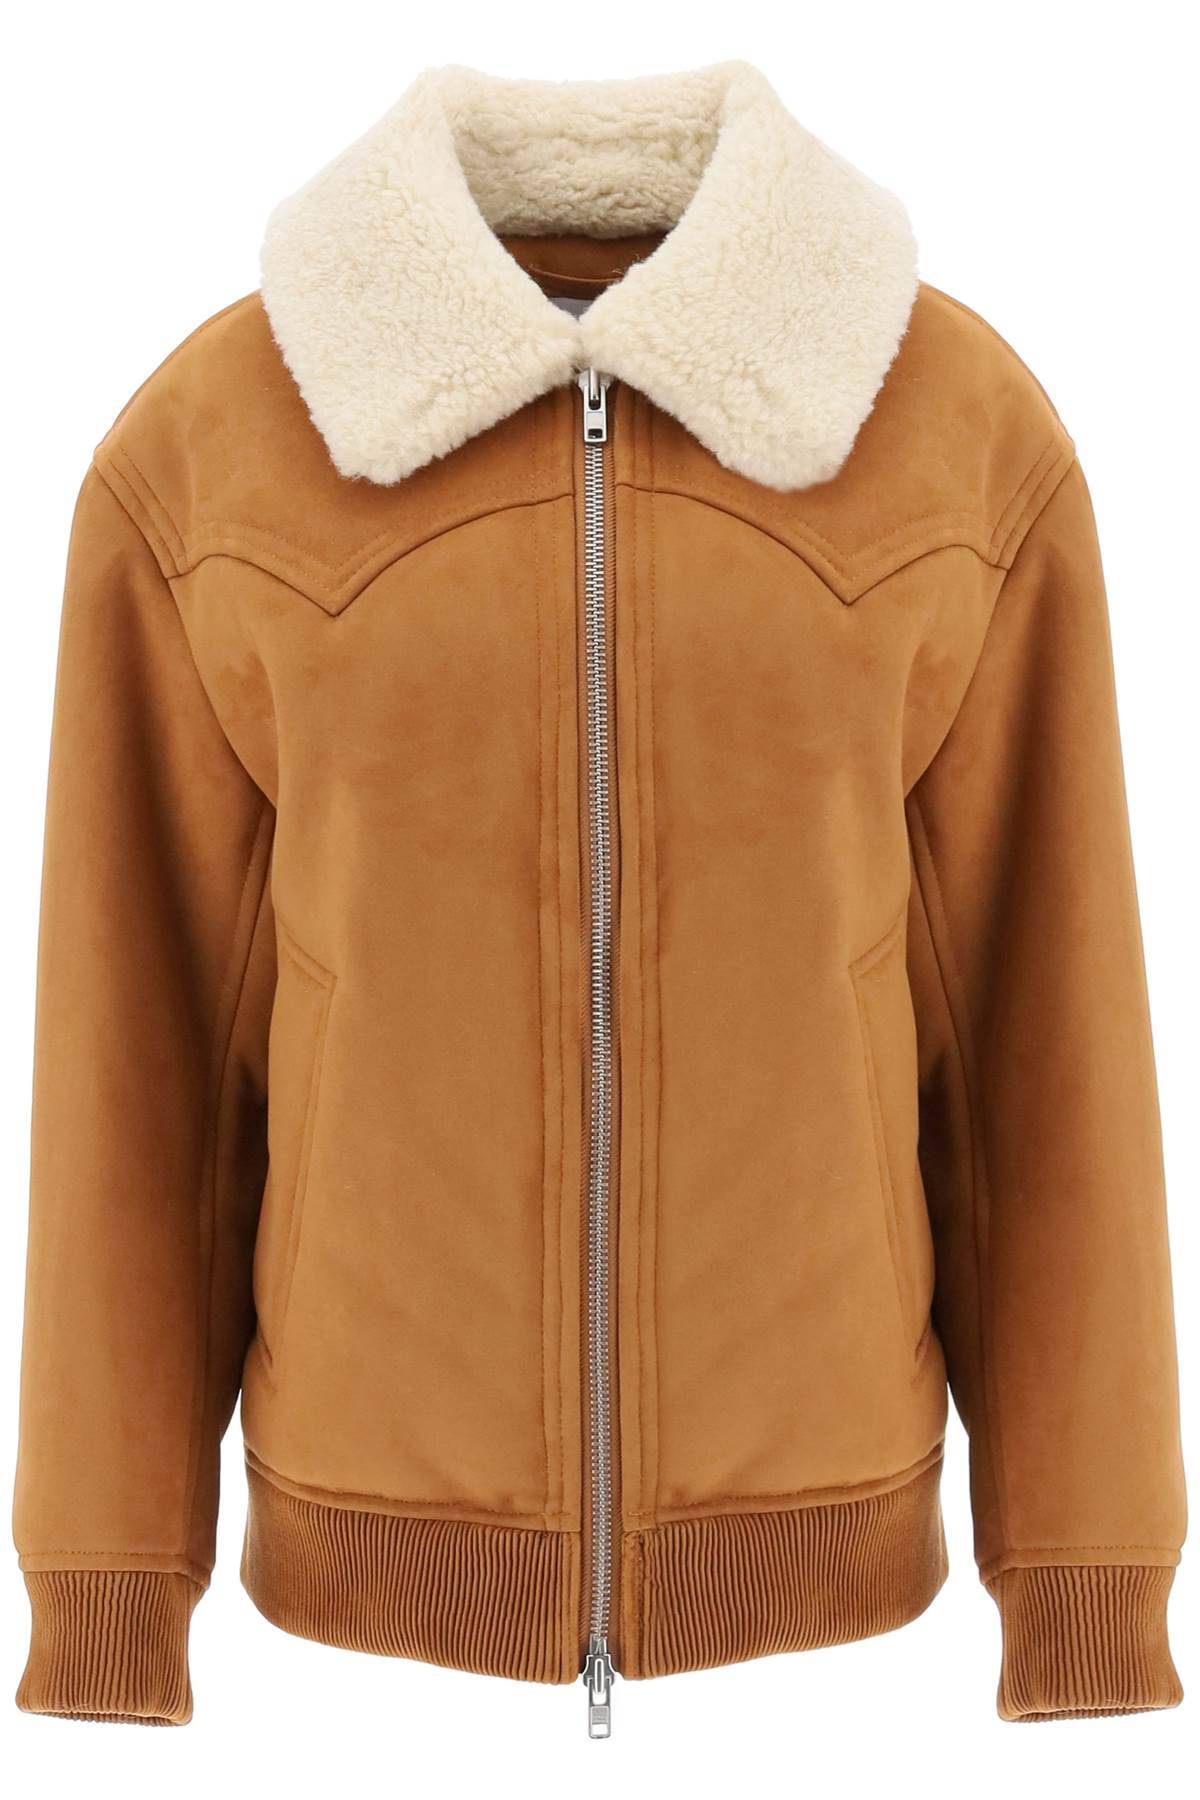 Stand Studio STAND STUDIO lillee eco-shearling bomber jacket